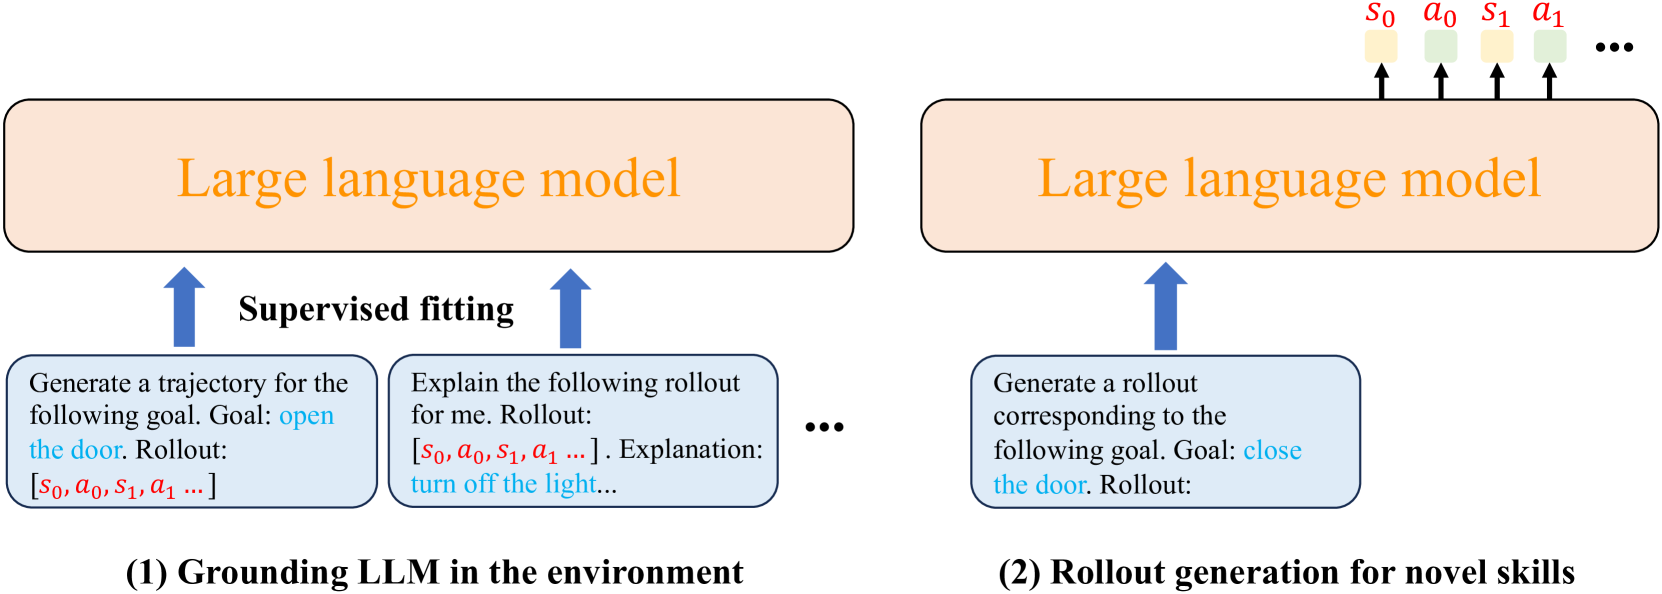 Knowledgeable Agents by Offline Reinforcement Learning from Large Language Model Rollouts